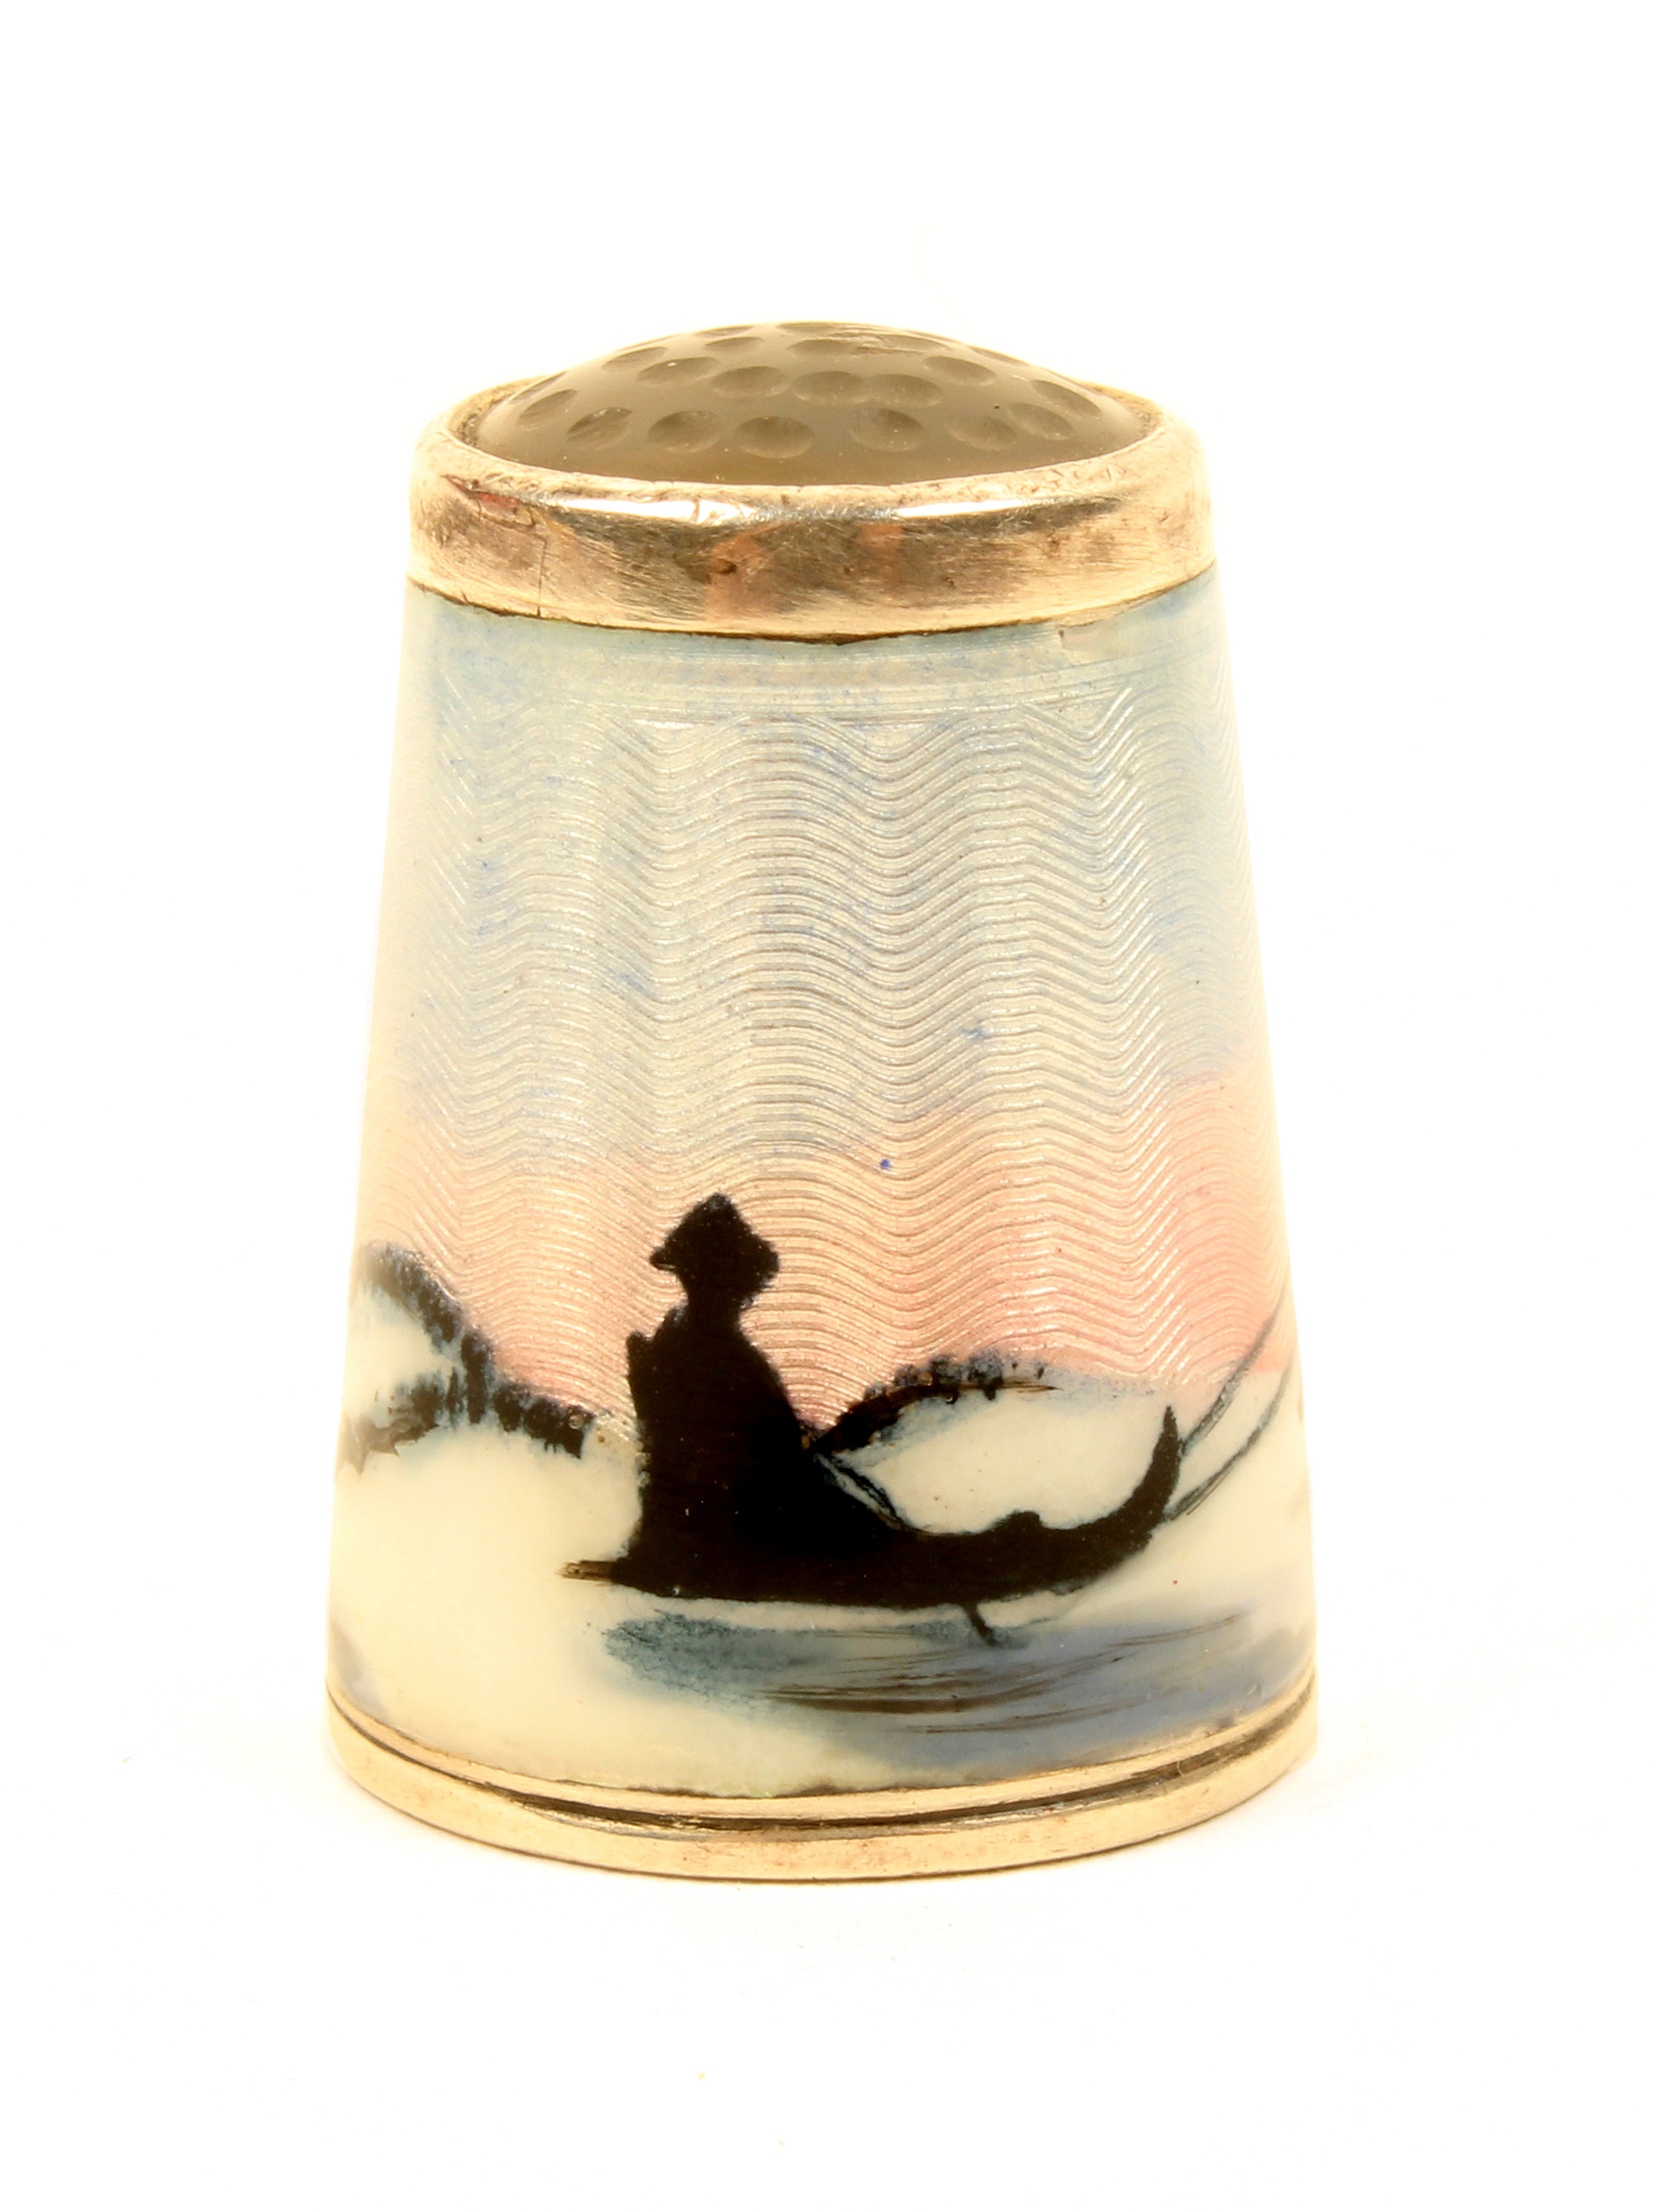 A Norwegian silver and enamel stone top thimble by Alex Holmsen, with a frieze of a Sami in a sled - Image 3 of 3